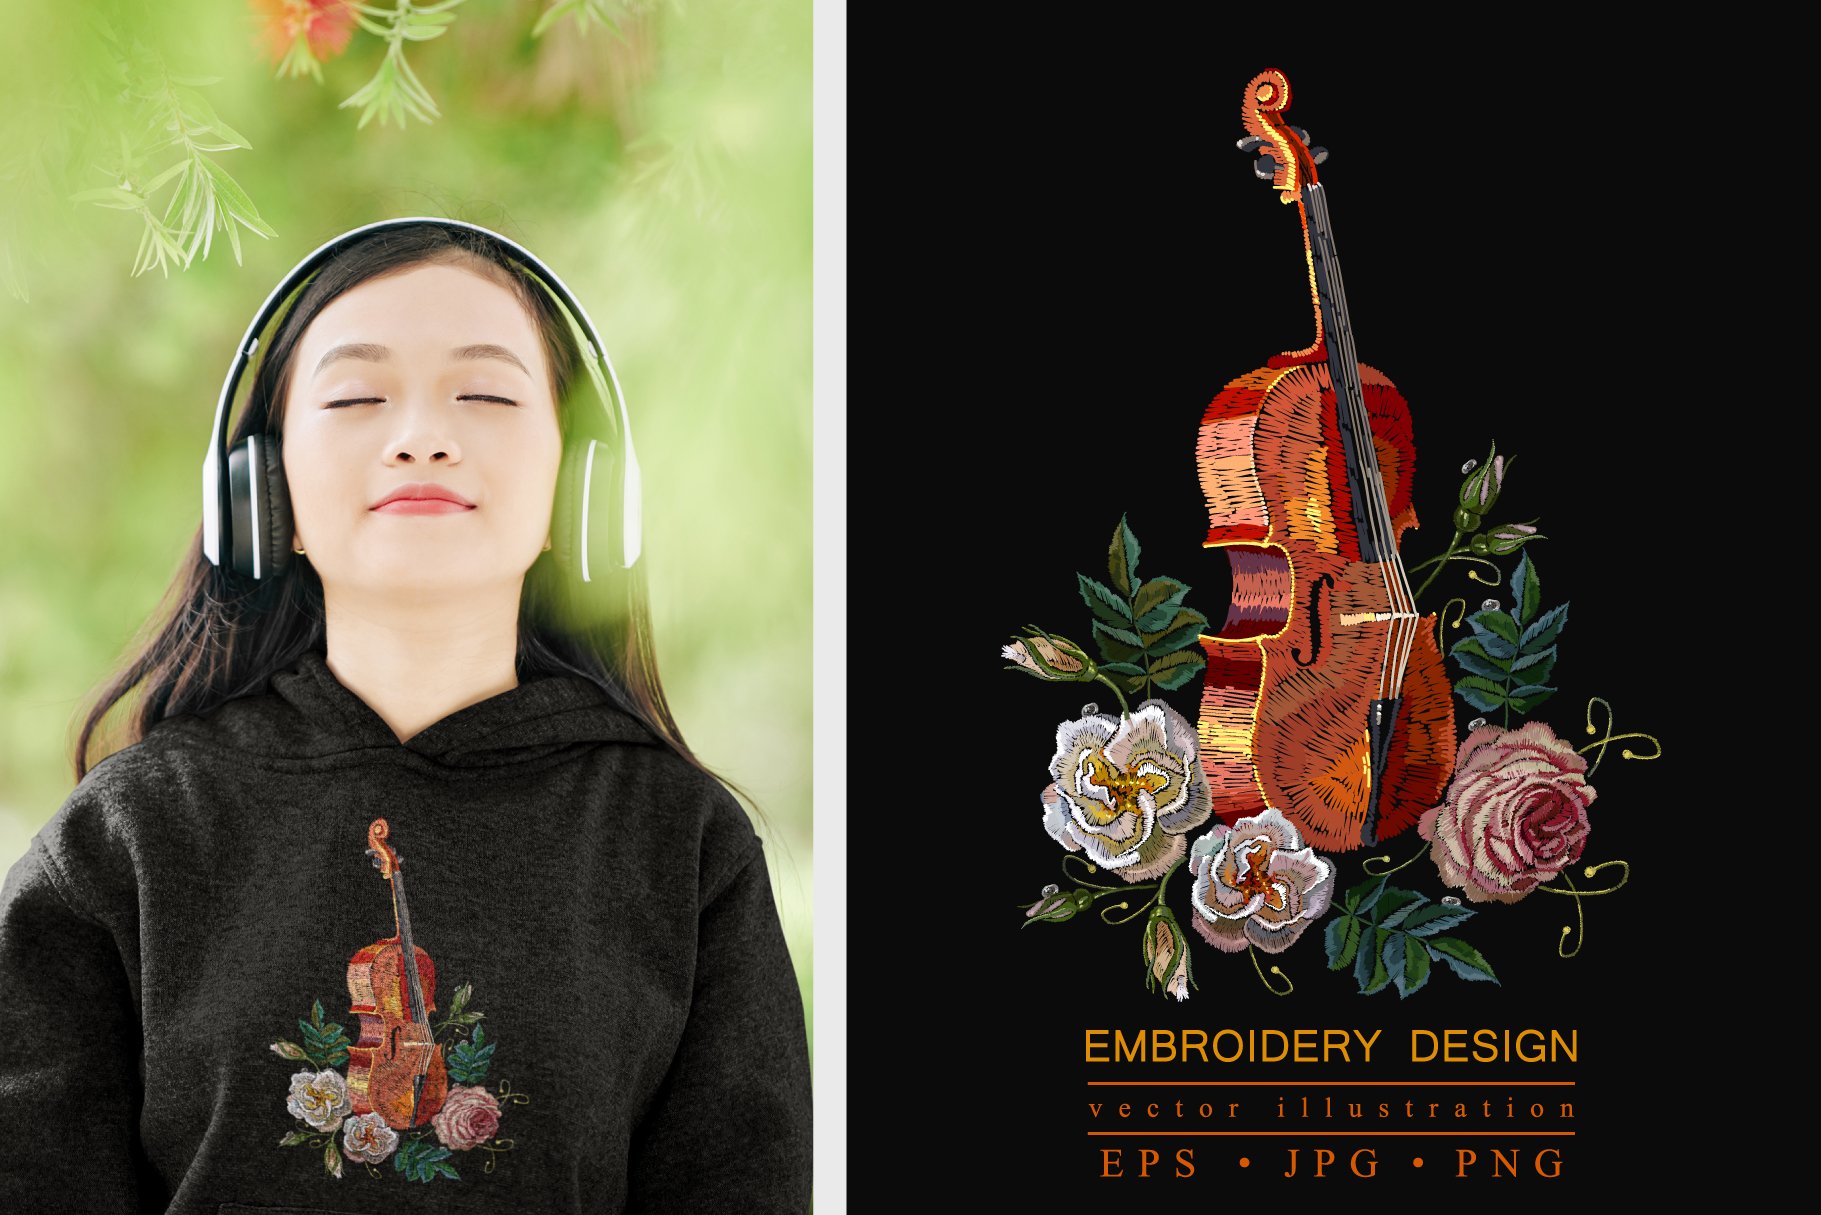 Embroidery violin and roses cover image.